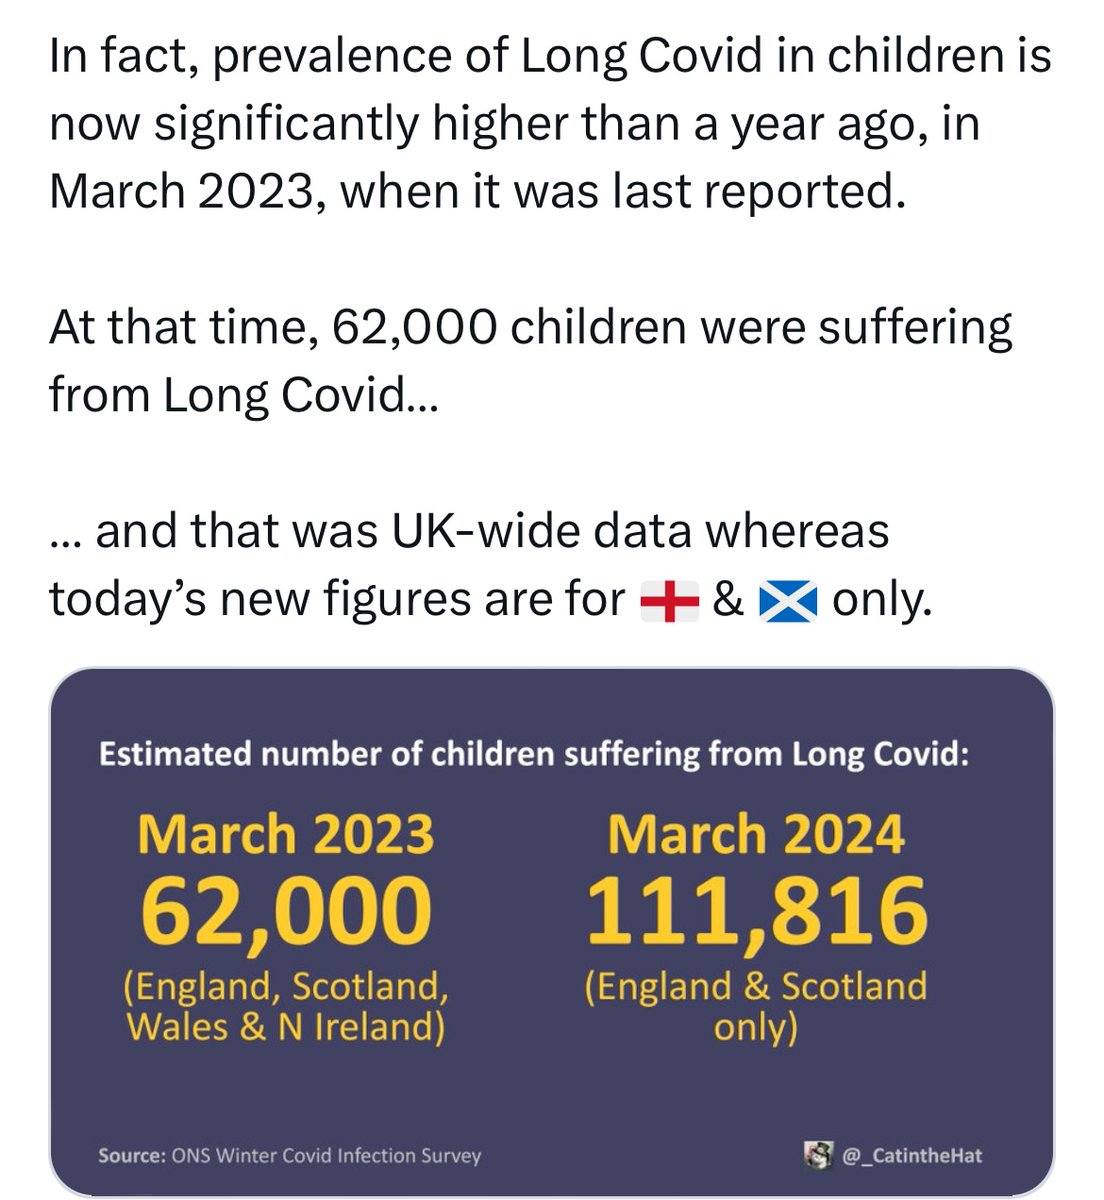 @DrCharlesL Maybe they could recognise the 111,000 children with confirmed Long Covid. So many more will be suffering the after effects of infection but the link not made. Lockdowns were handled terribly by an inept gov but deliberately ignoring @LongCovidKids is shameful